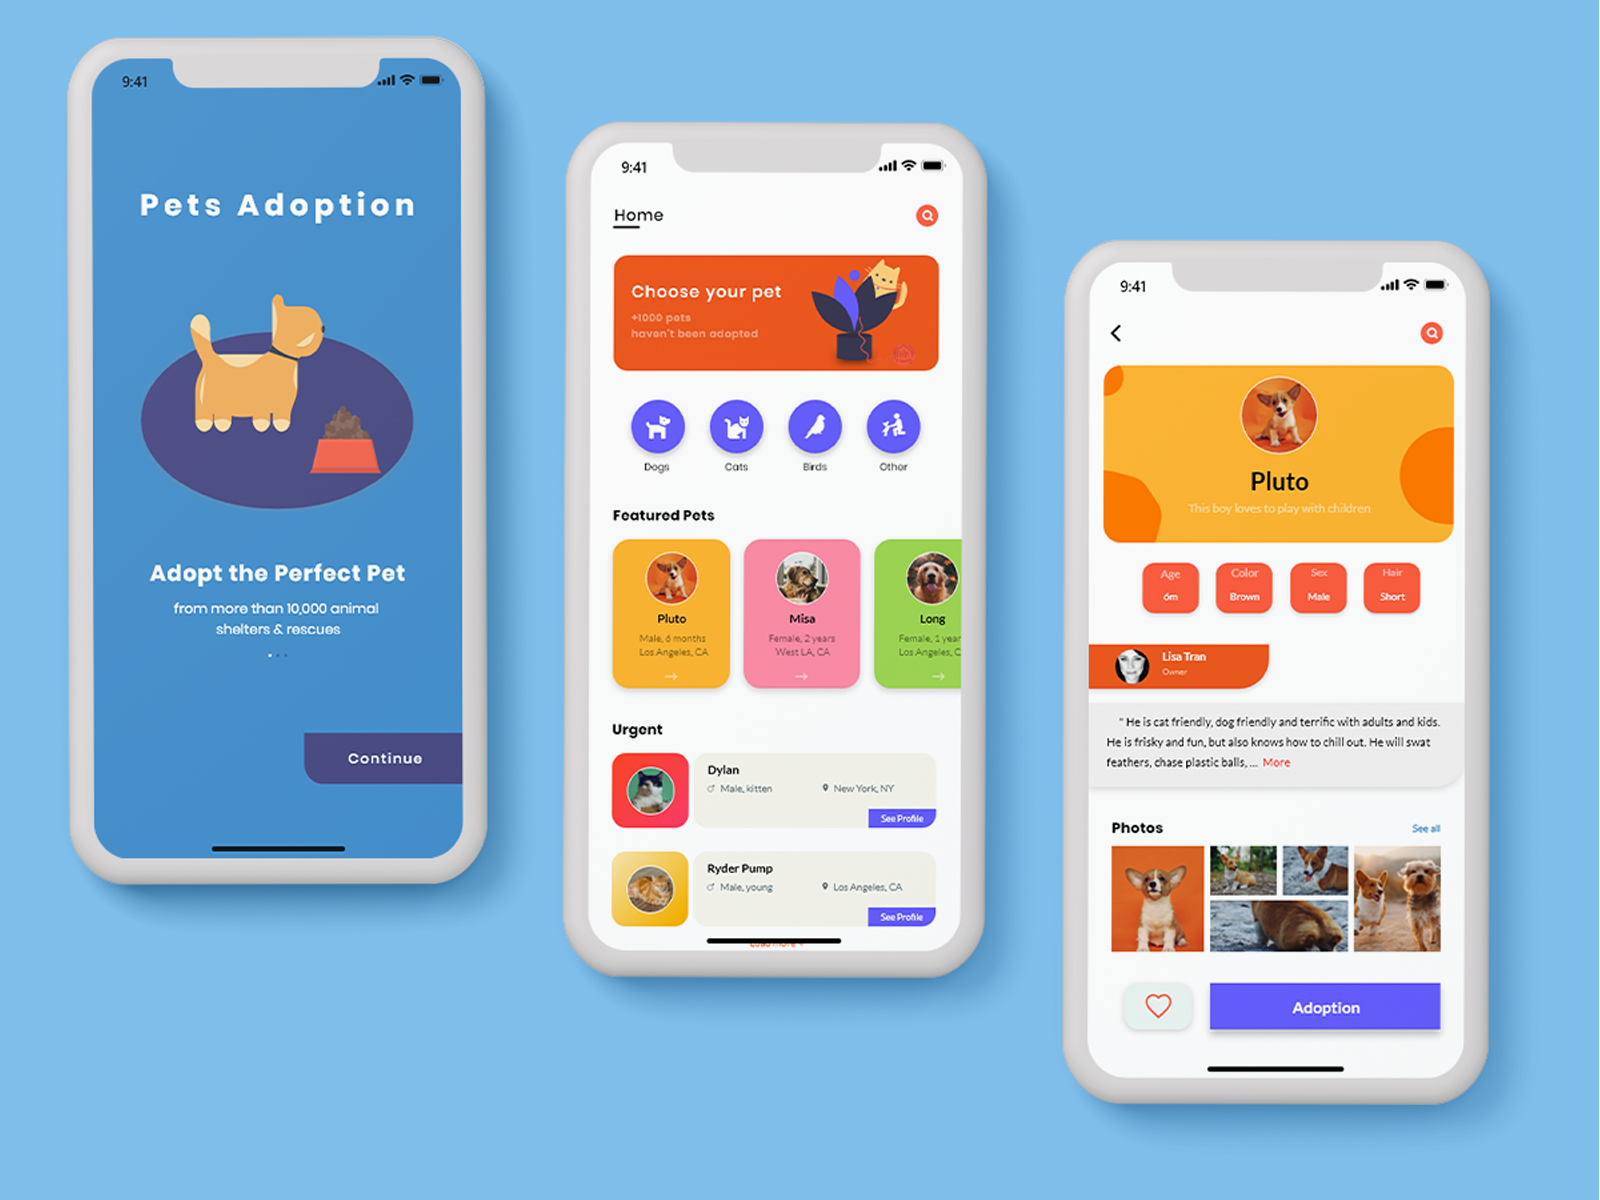 Pets Adoption by Tung Tran on Dribbble